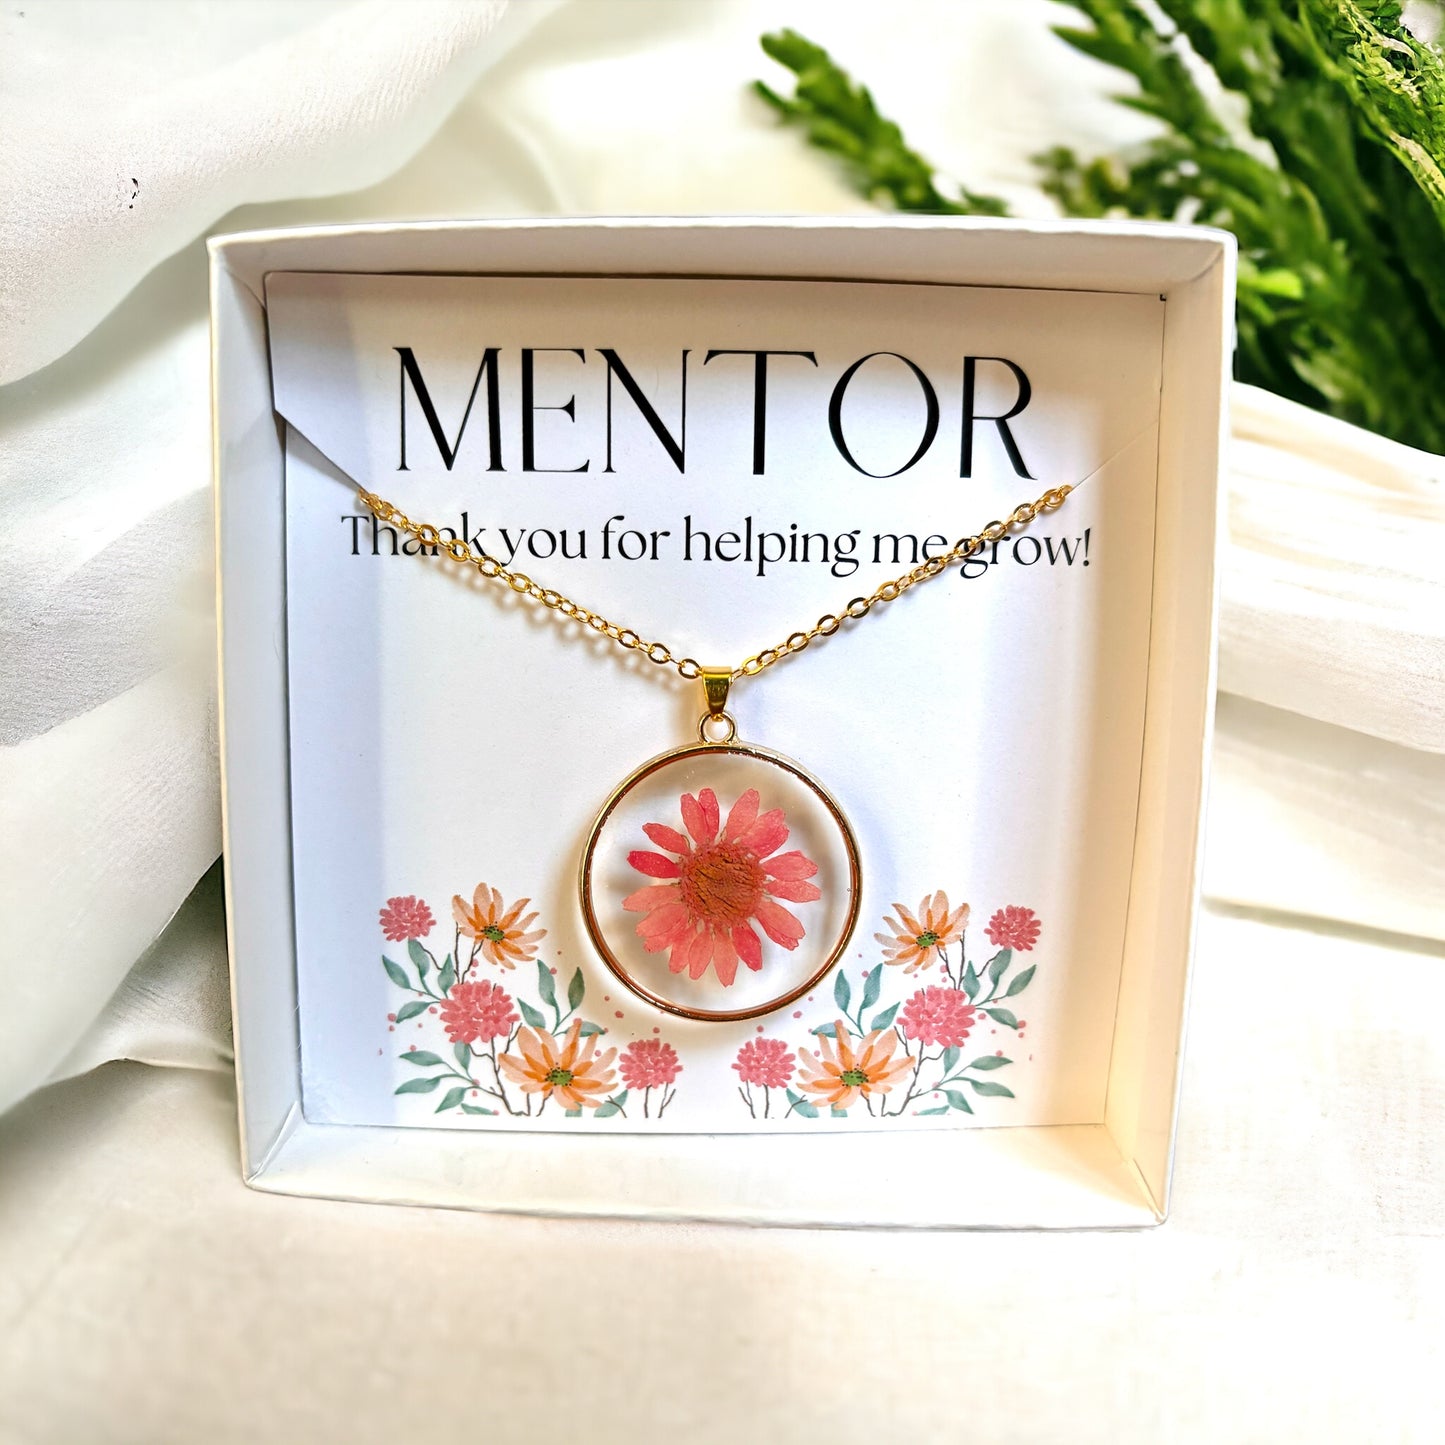 Teacher Gift Botanical Necklace Collection With FREE Gift Box + Packaging